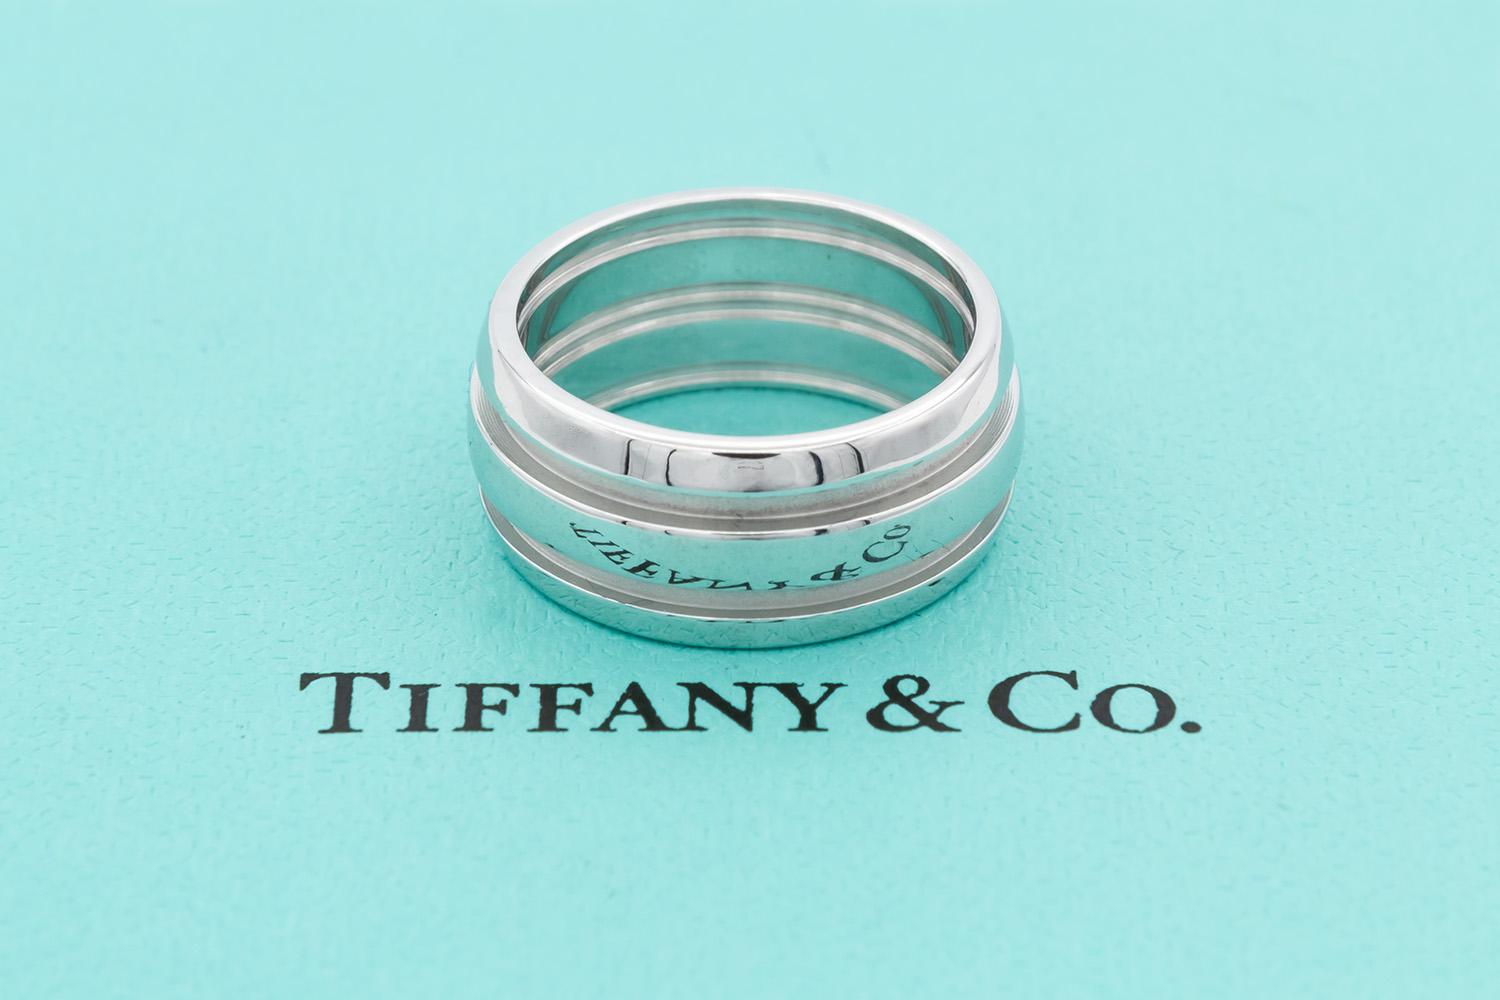 We are pleased to offer this Authentic Tiffany & Co. Atlas Double Groove 18k White Gold Band Ring. It features the classic Atlas styling with a double groove. It is a size 7 US and measures 9mm wide. It comes with the Tiffany ring box. The ring is